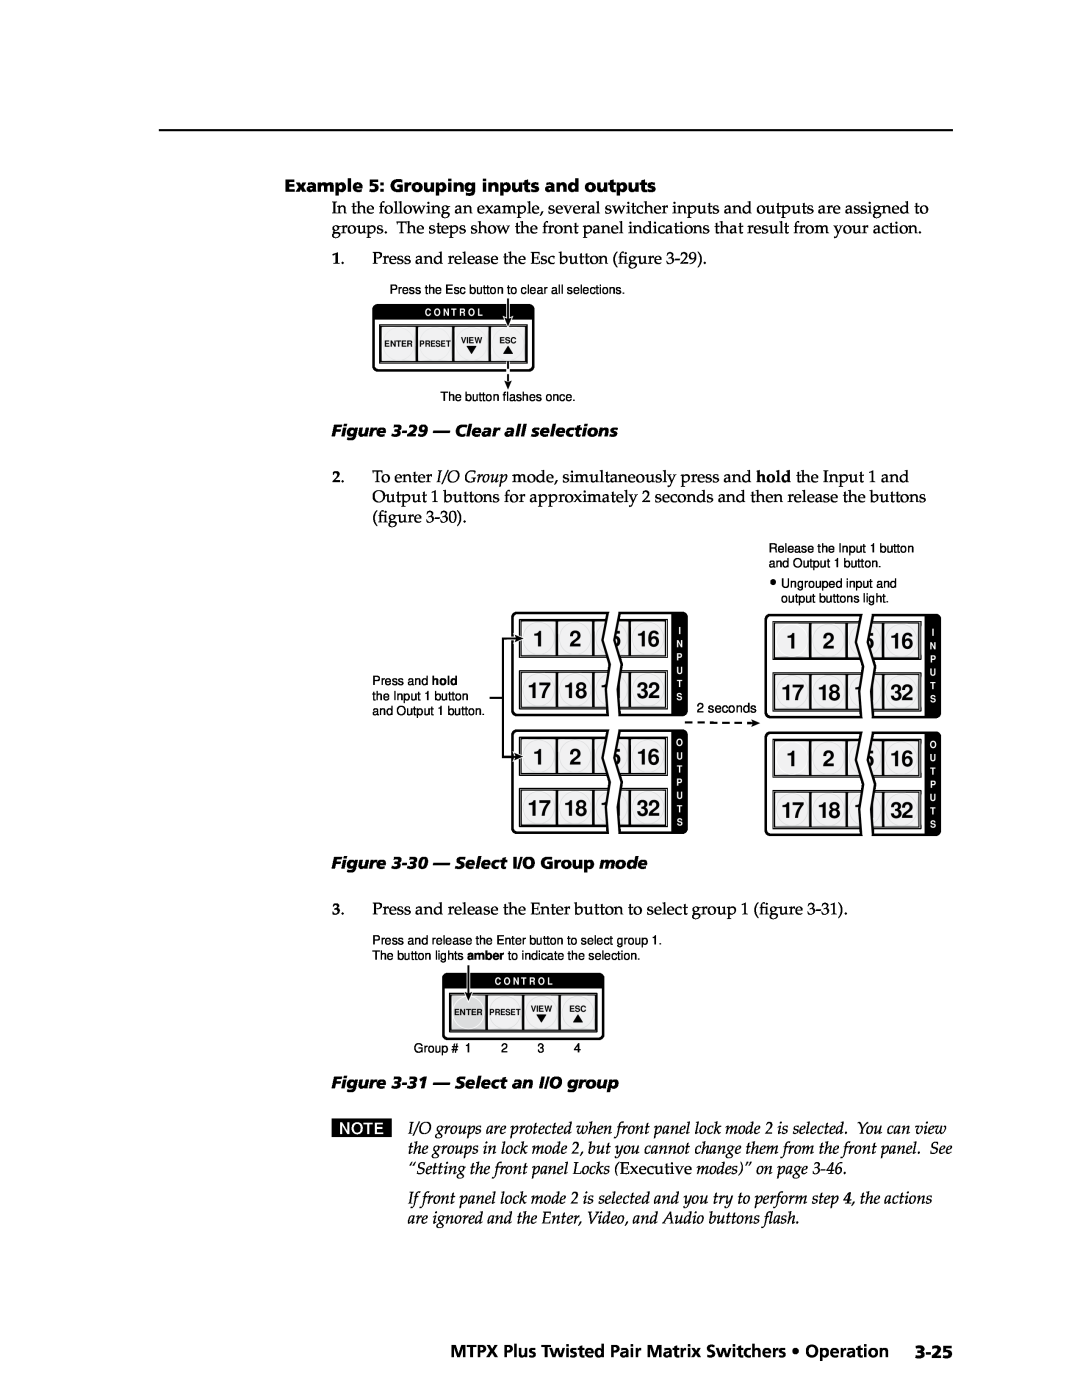 Extron electronic MTPX Plus Series manual Example 5 Grouping inputs and outputs, 29 - Clear all selections, seconds 